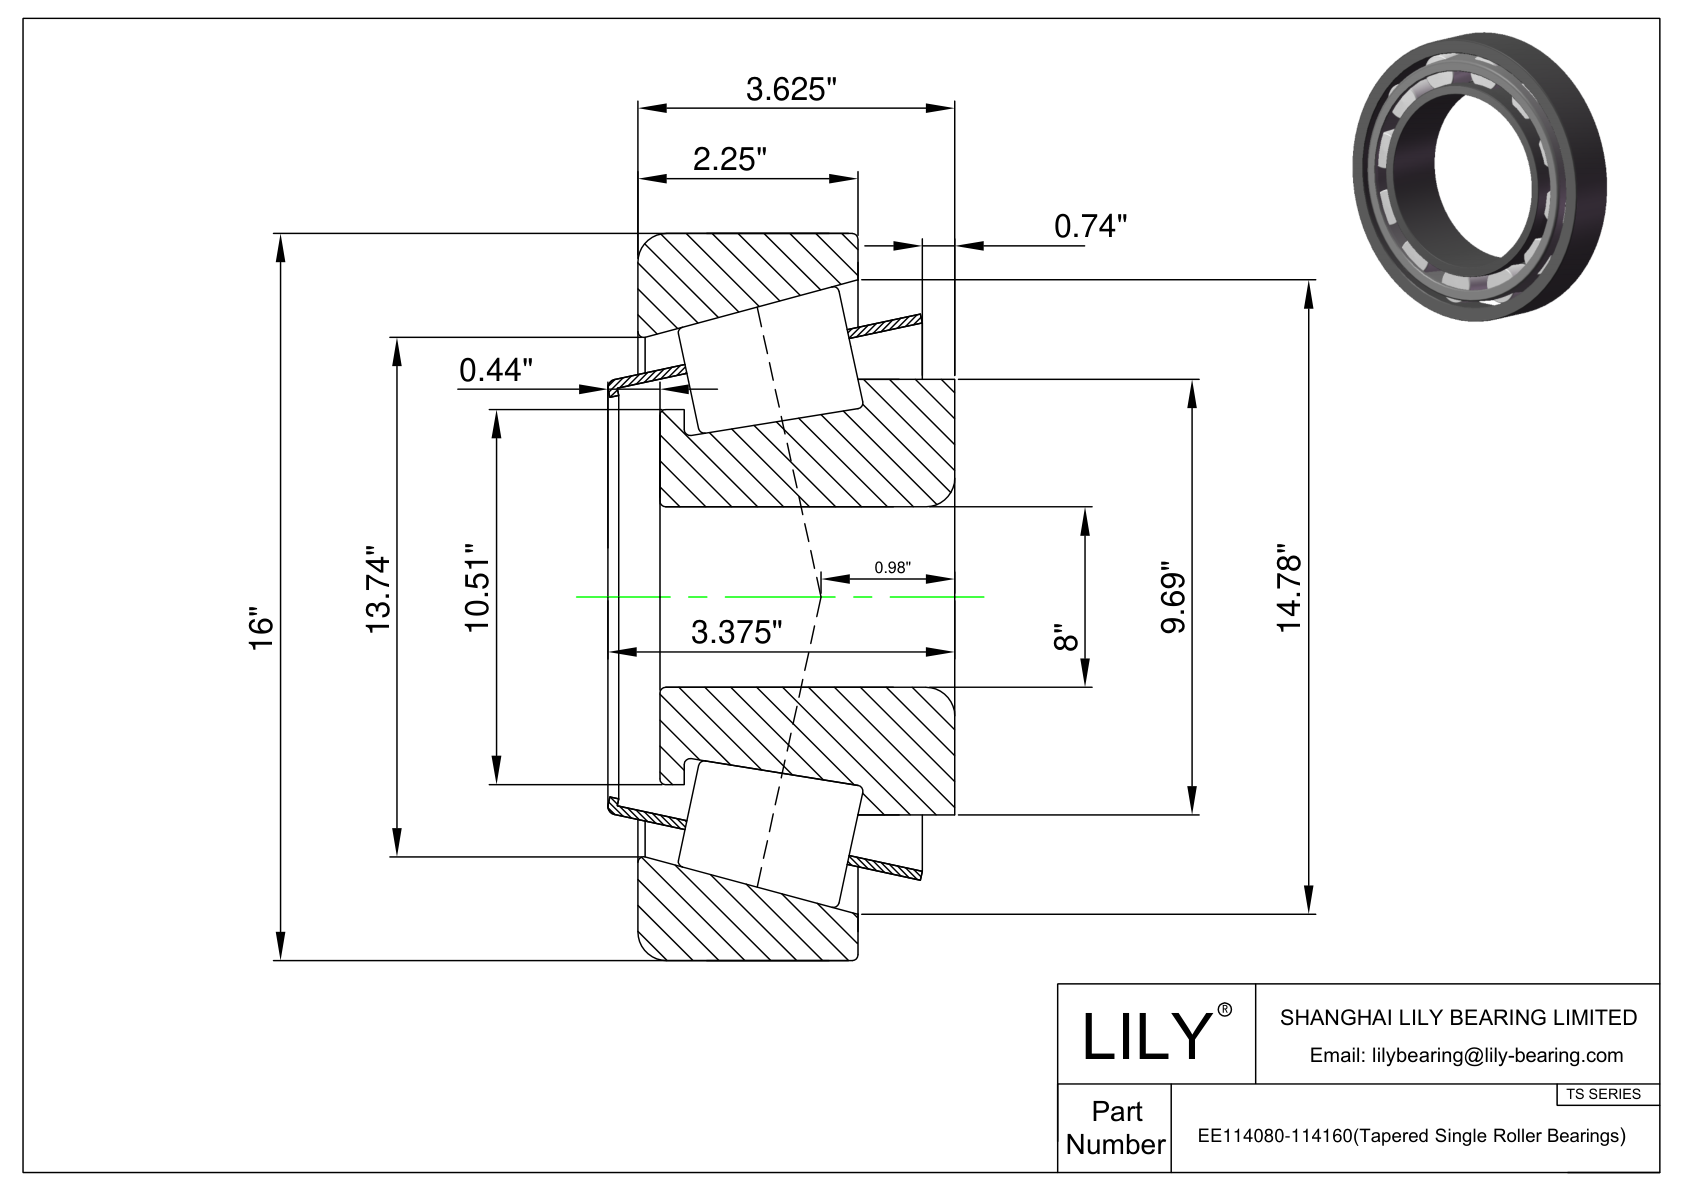 EE114080-114160 TS (Tapered Single Roller Bearings) (Imperial) cad drawing